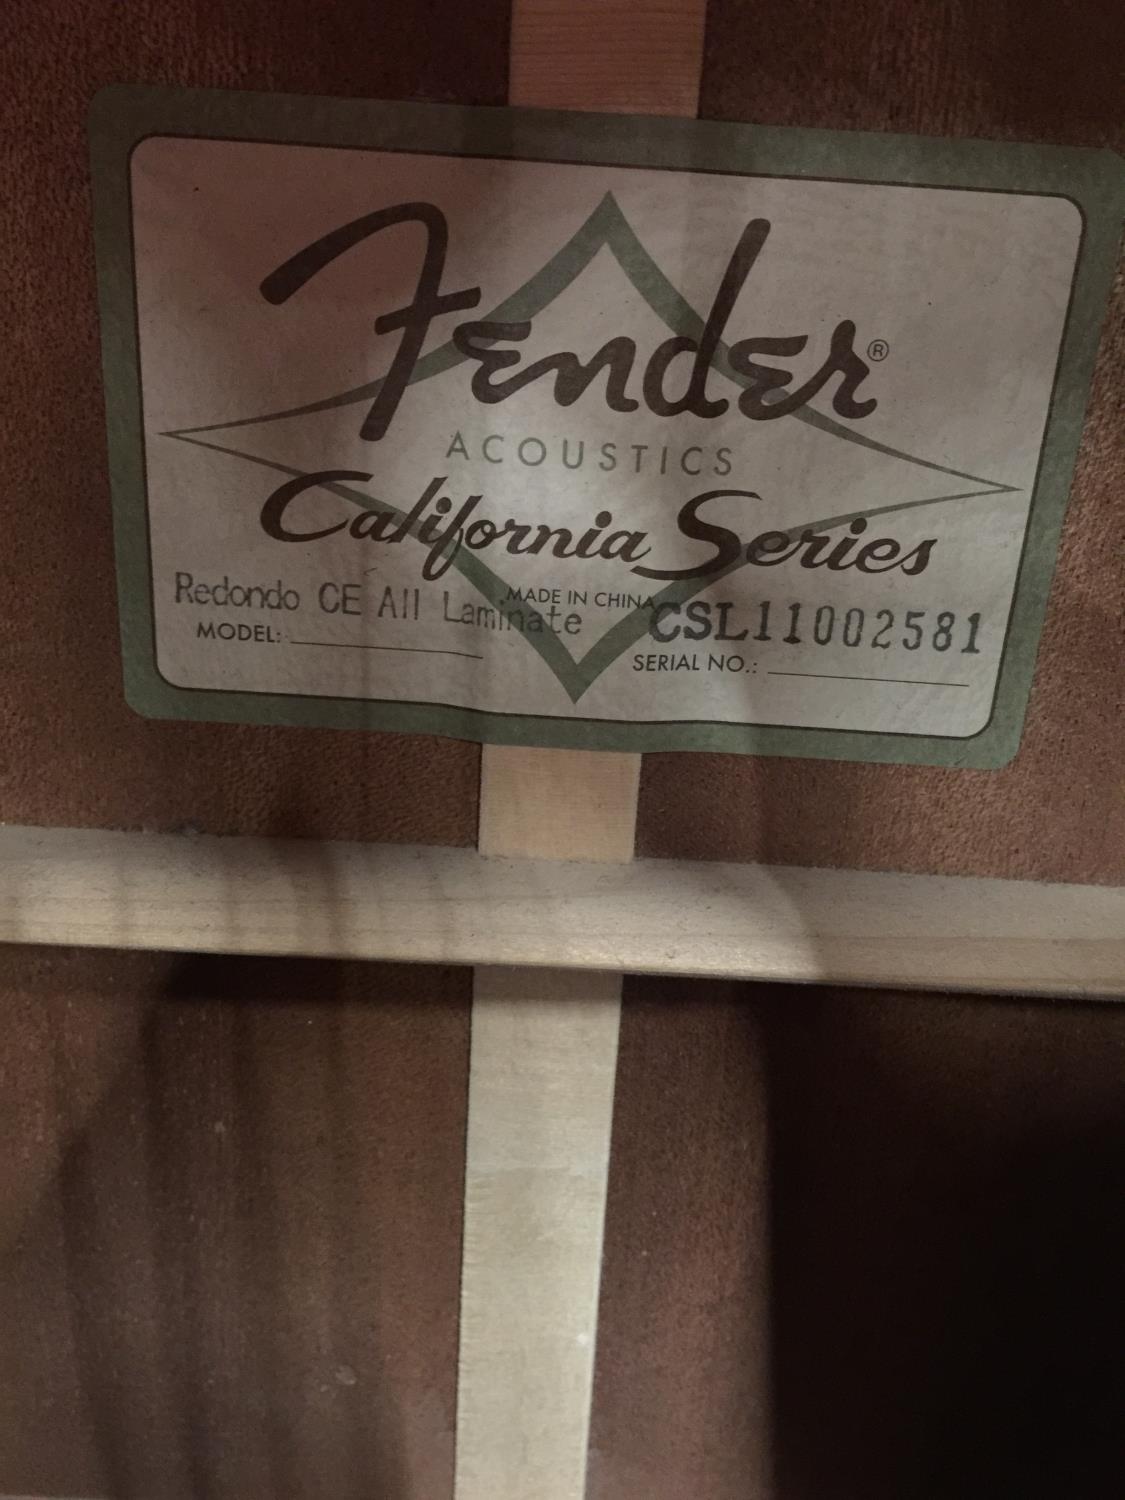 A FENDER REDONDO ELECTRIC ACOUSTIC CALIFORNIA SERIES GUITAR - Image 3 of 13